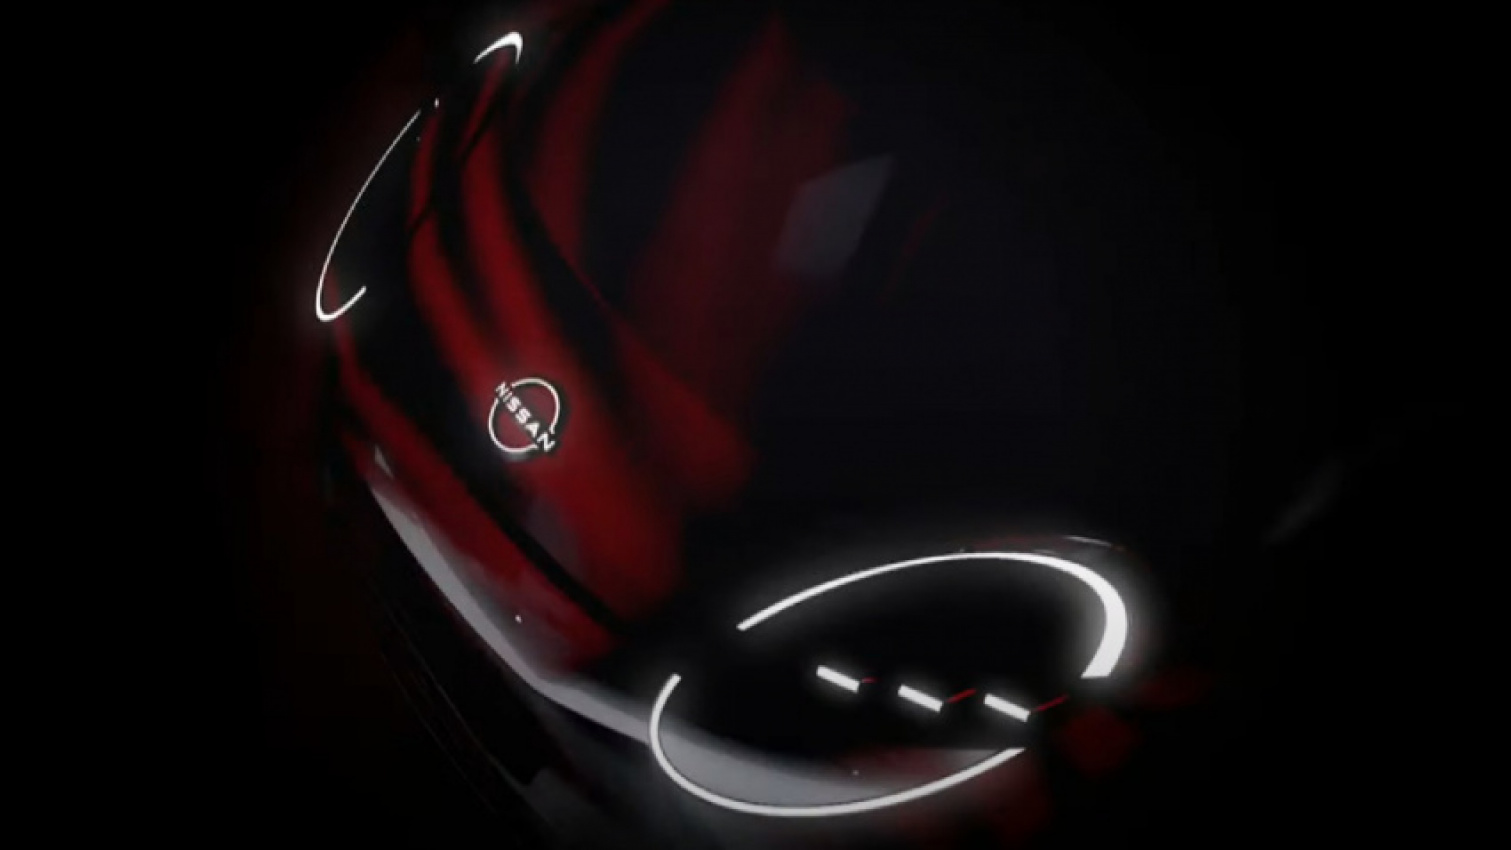 autos, cars, news, nissan, renault, electric vehicles, new cars, nissan micra, nissan videos, teaser, video, nissan announces renault-engineered electric hatch as micra successor for europe